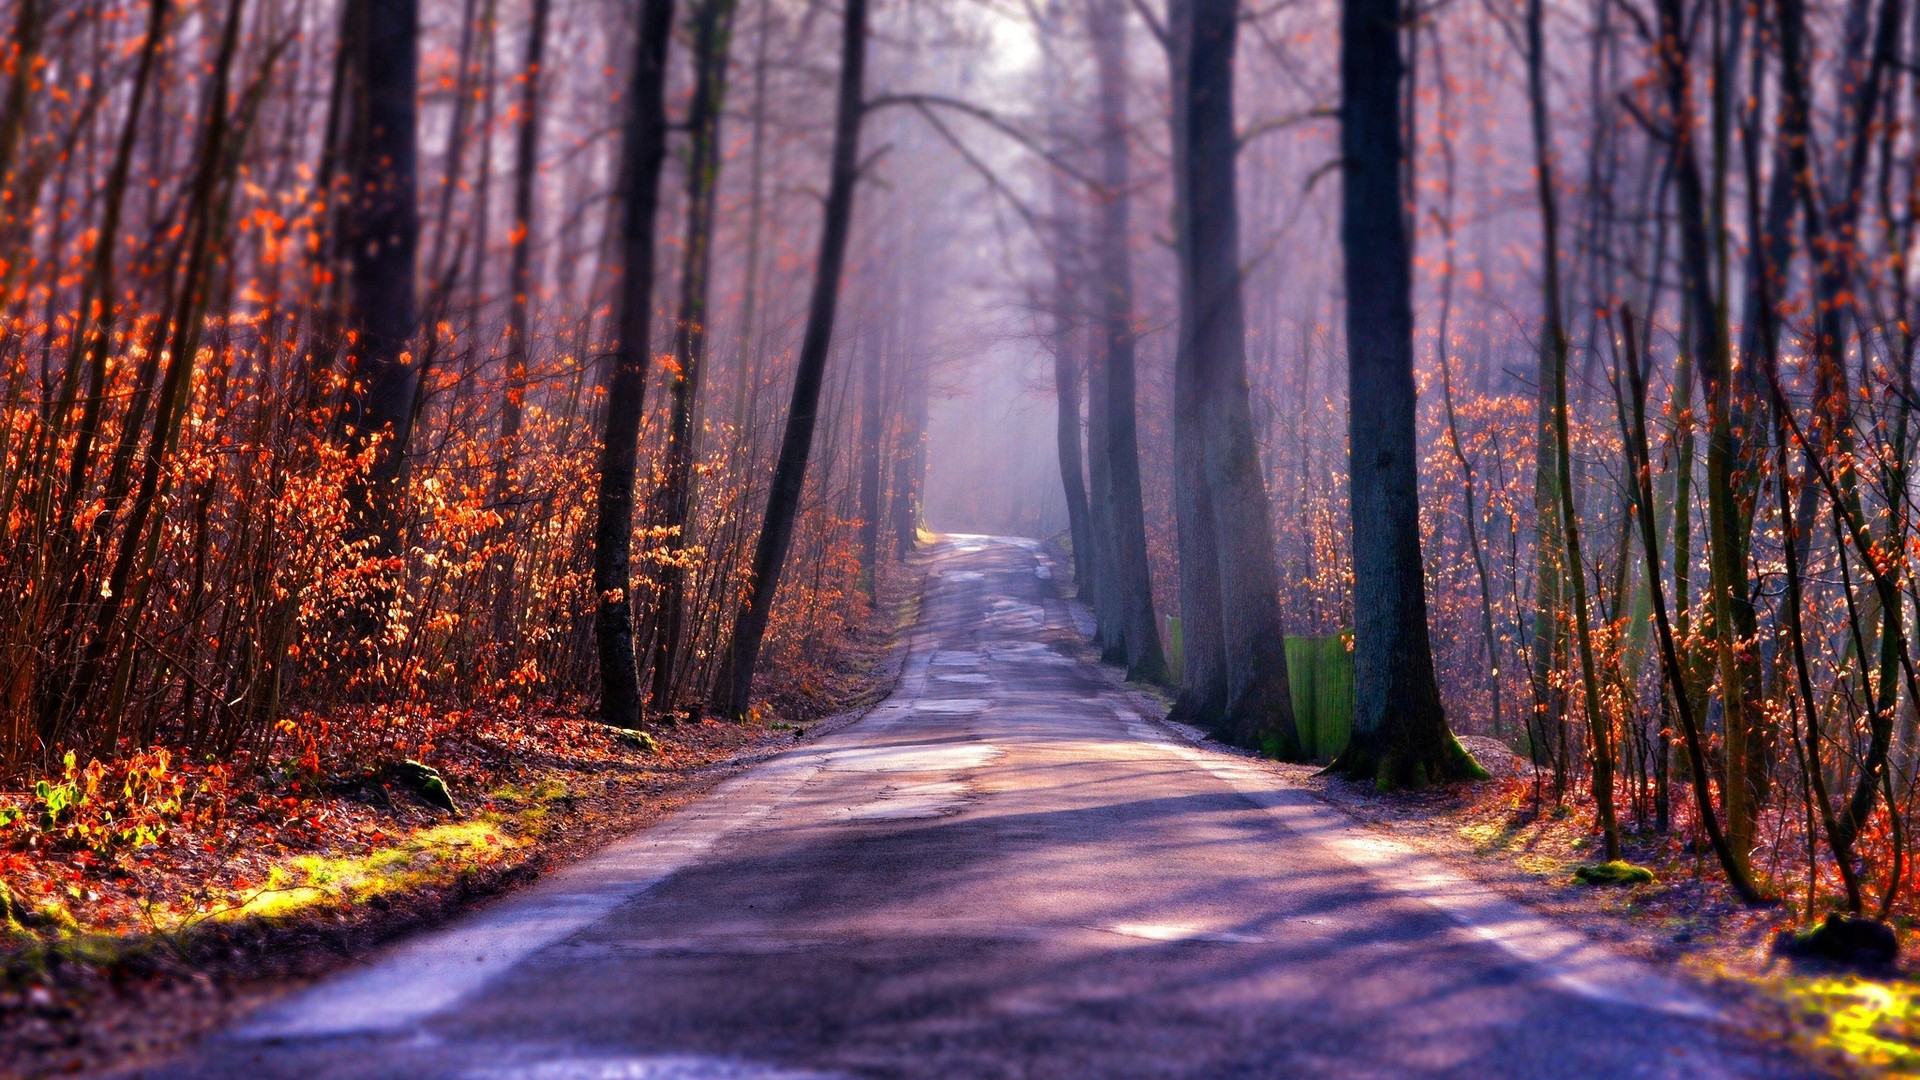 General 1920x1080 nature trees forest branch fall leaves road plants shadow sunlight depth of field tilt shift